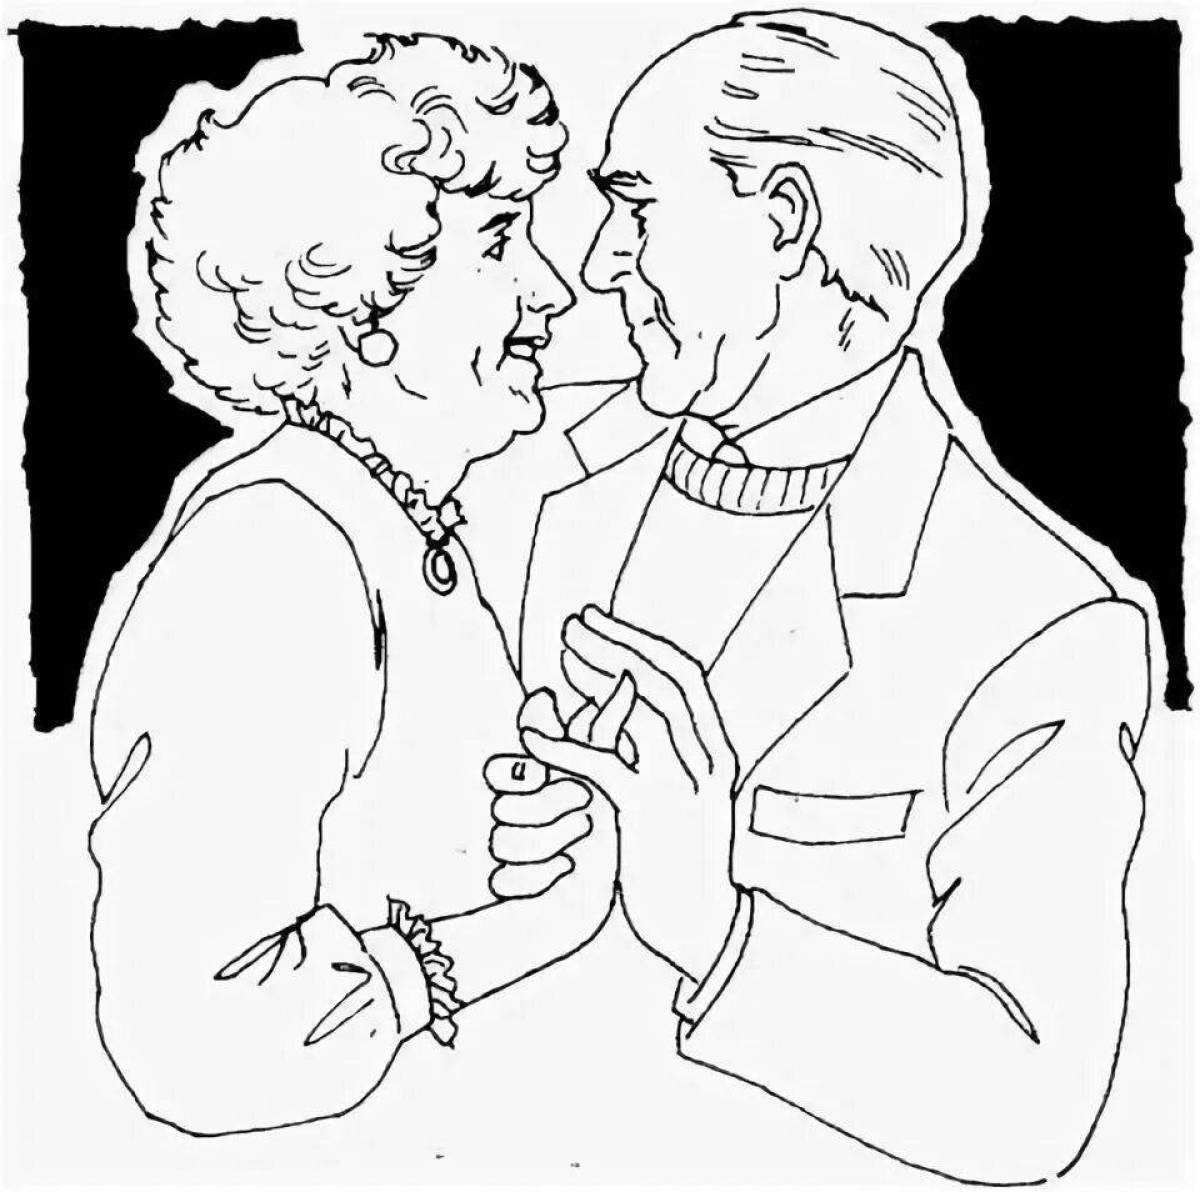 Creative coloring book for older people with dementia